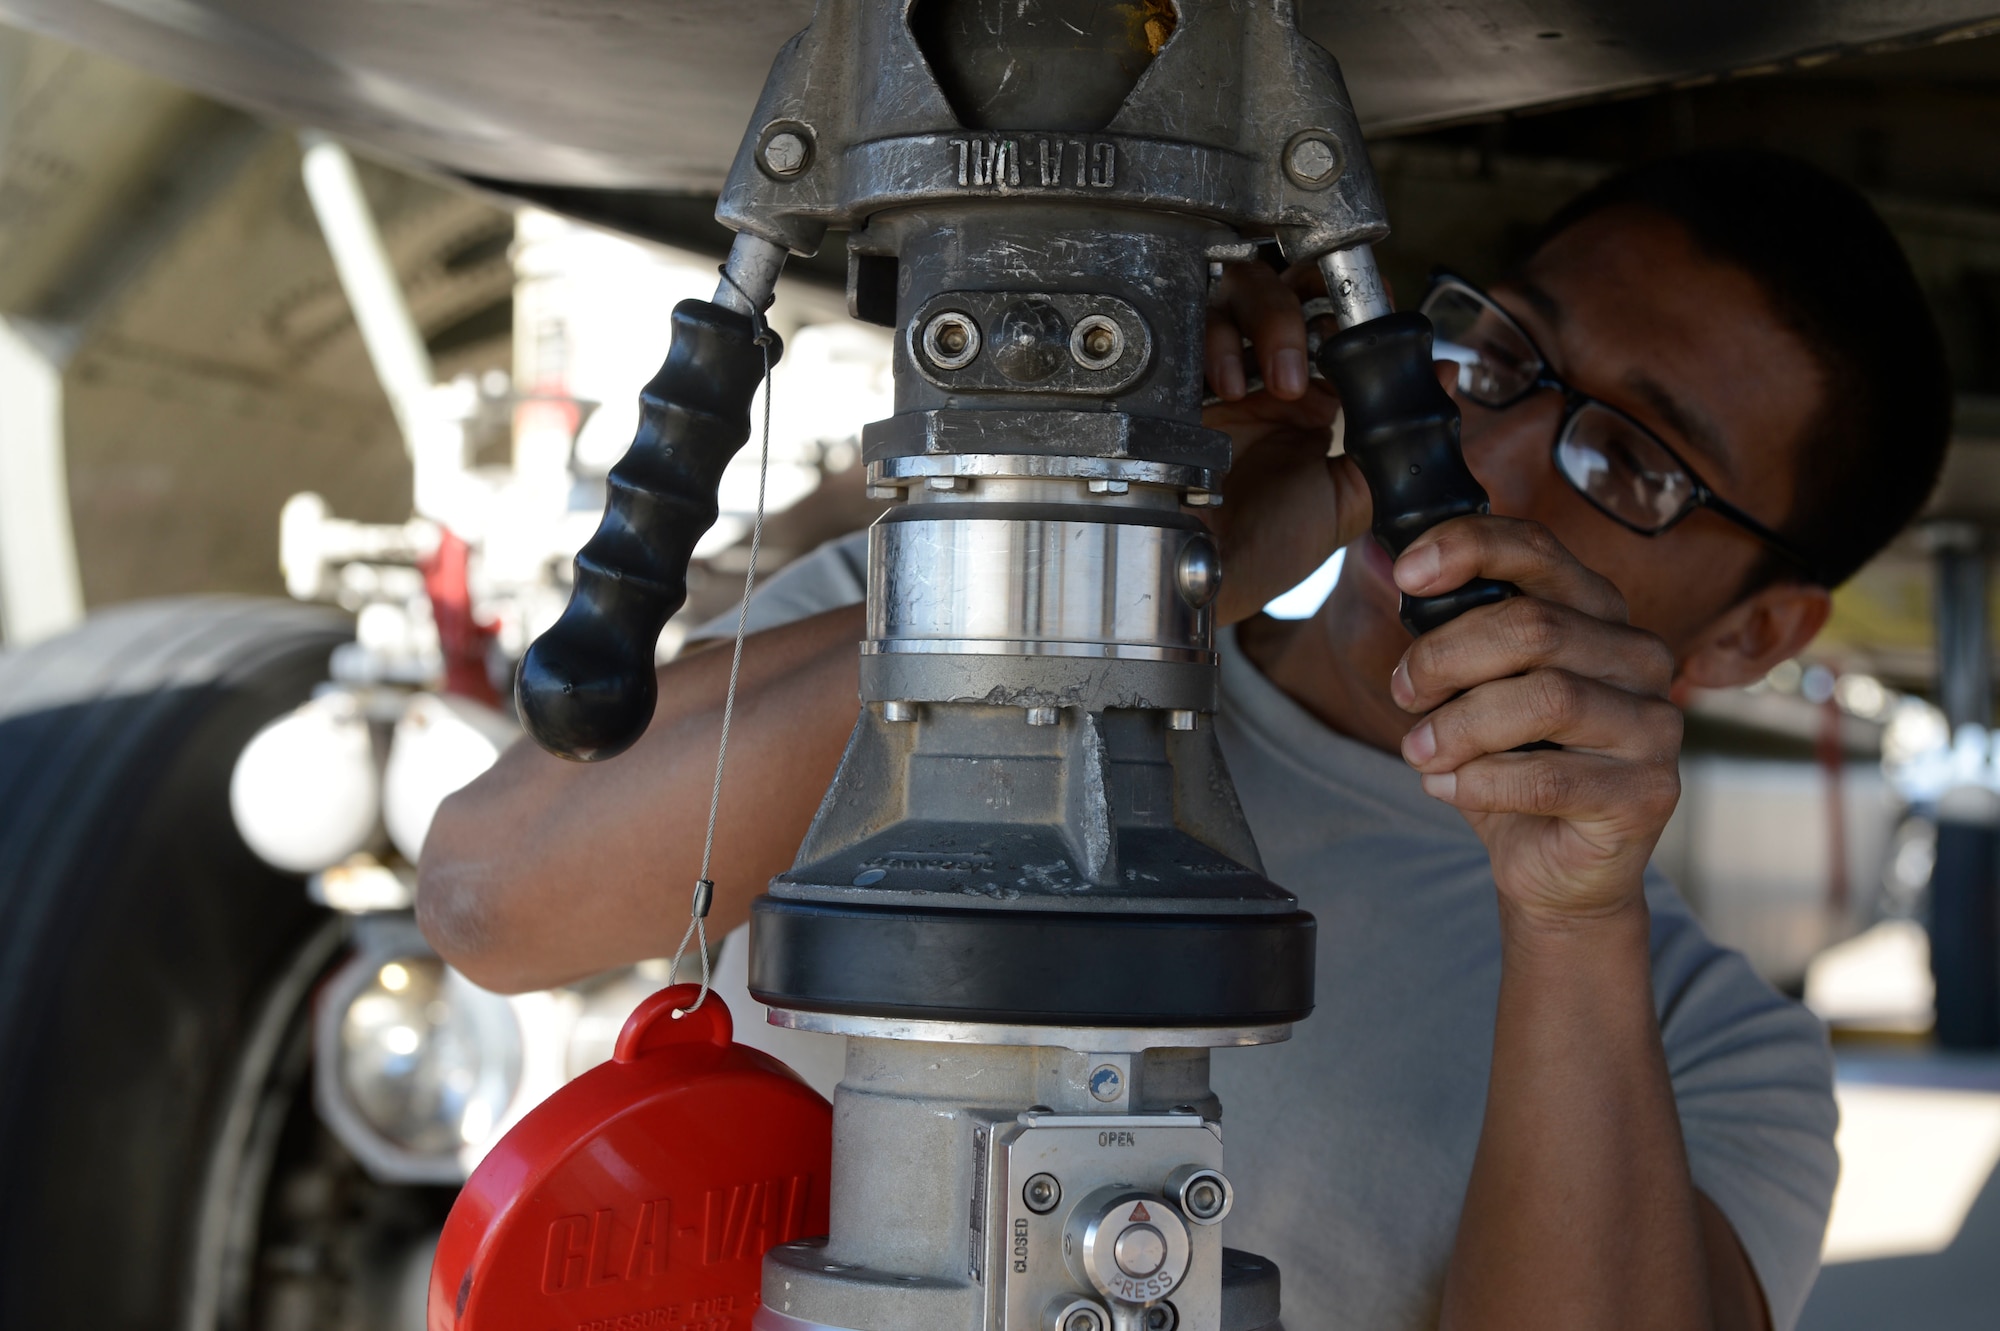 Senior Airman Aaron Sampayan, assigned to the 23rd Expeditionary Bomb Squadron, connects a refueling hose to a B-52 Stratofortress, at Morón Air Base, Spain, Jan. 16, 2018. Through U.S. and Spanish cooperation, Morón Air Base has a long history of supporting bomber operations and serving the strategic deterrence requirements of U.S. and NATO allies for decades. (U.S. Air Force photo by Senior Airman Natalie Plas)